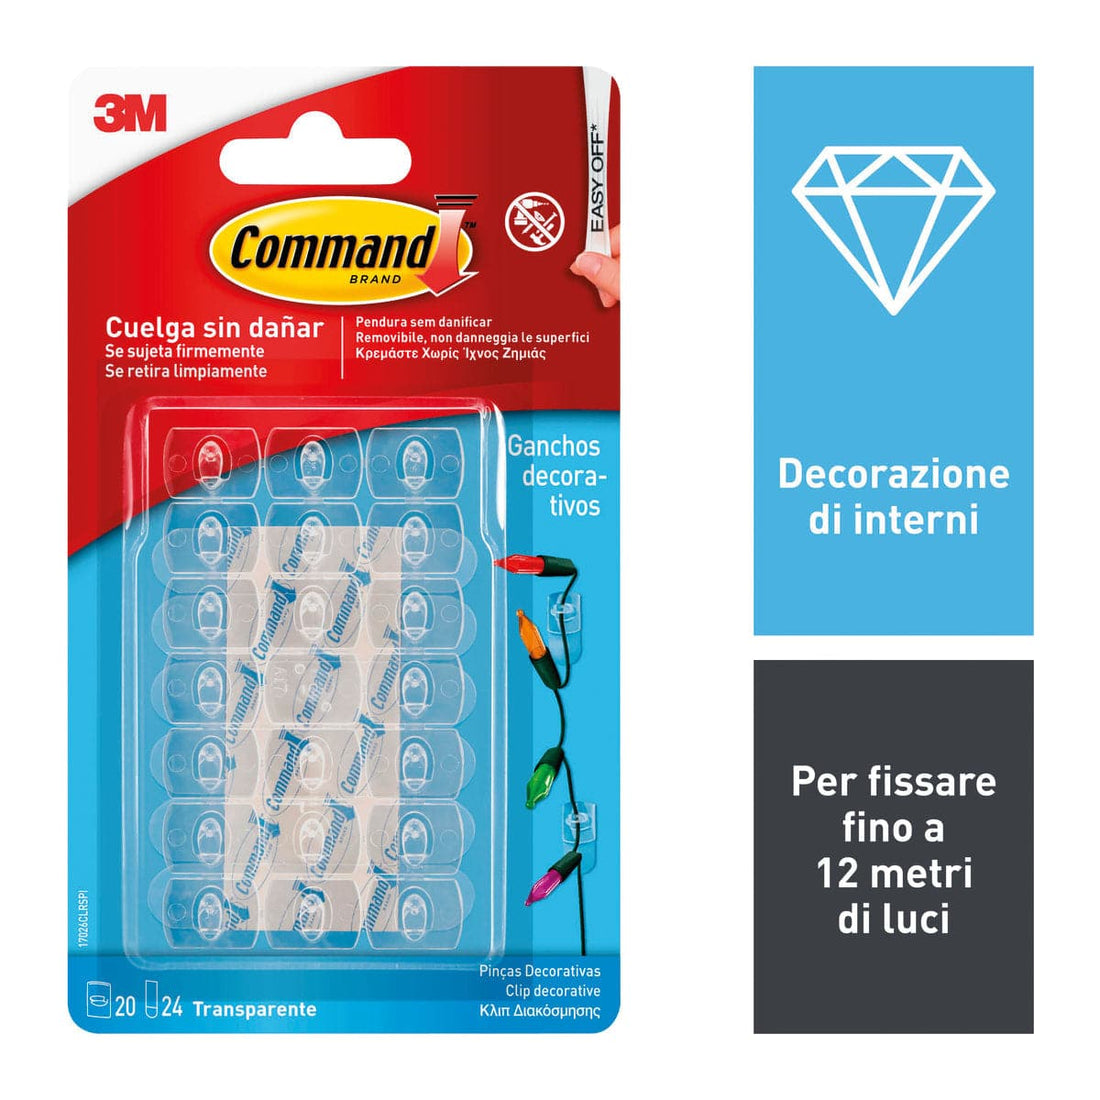 20 TRANSPARENT ADHESIVE HOOKS FOR COMMAND DECORATIONS - best price from Maltashopper.com BR410007399